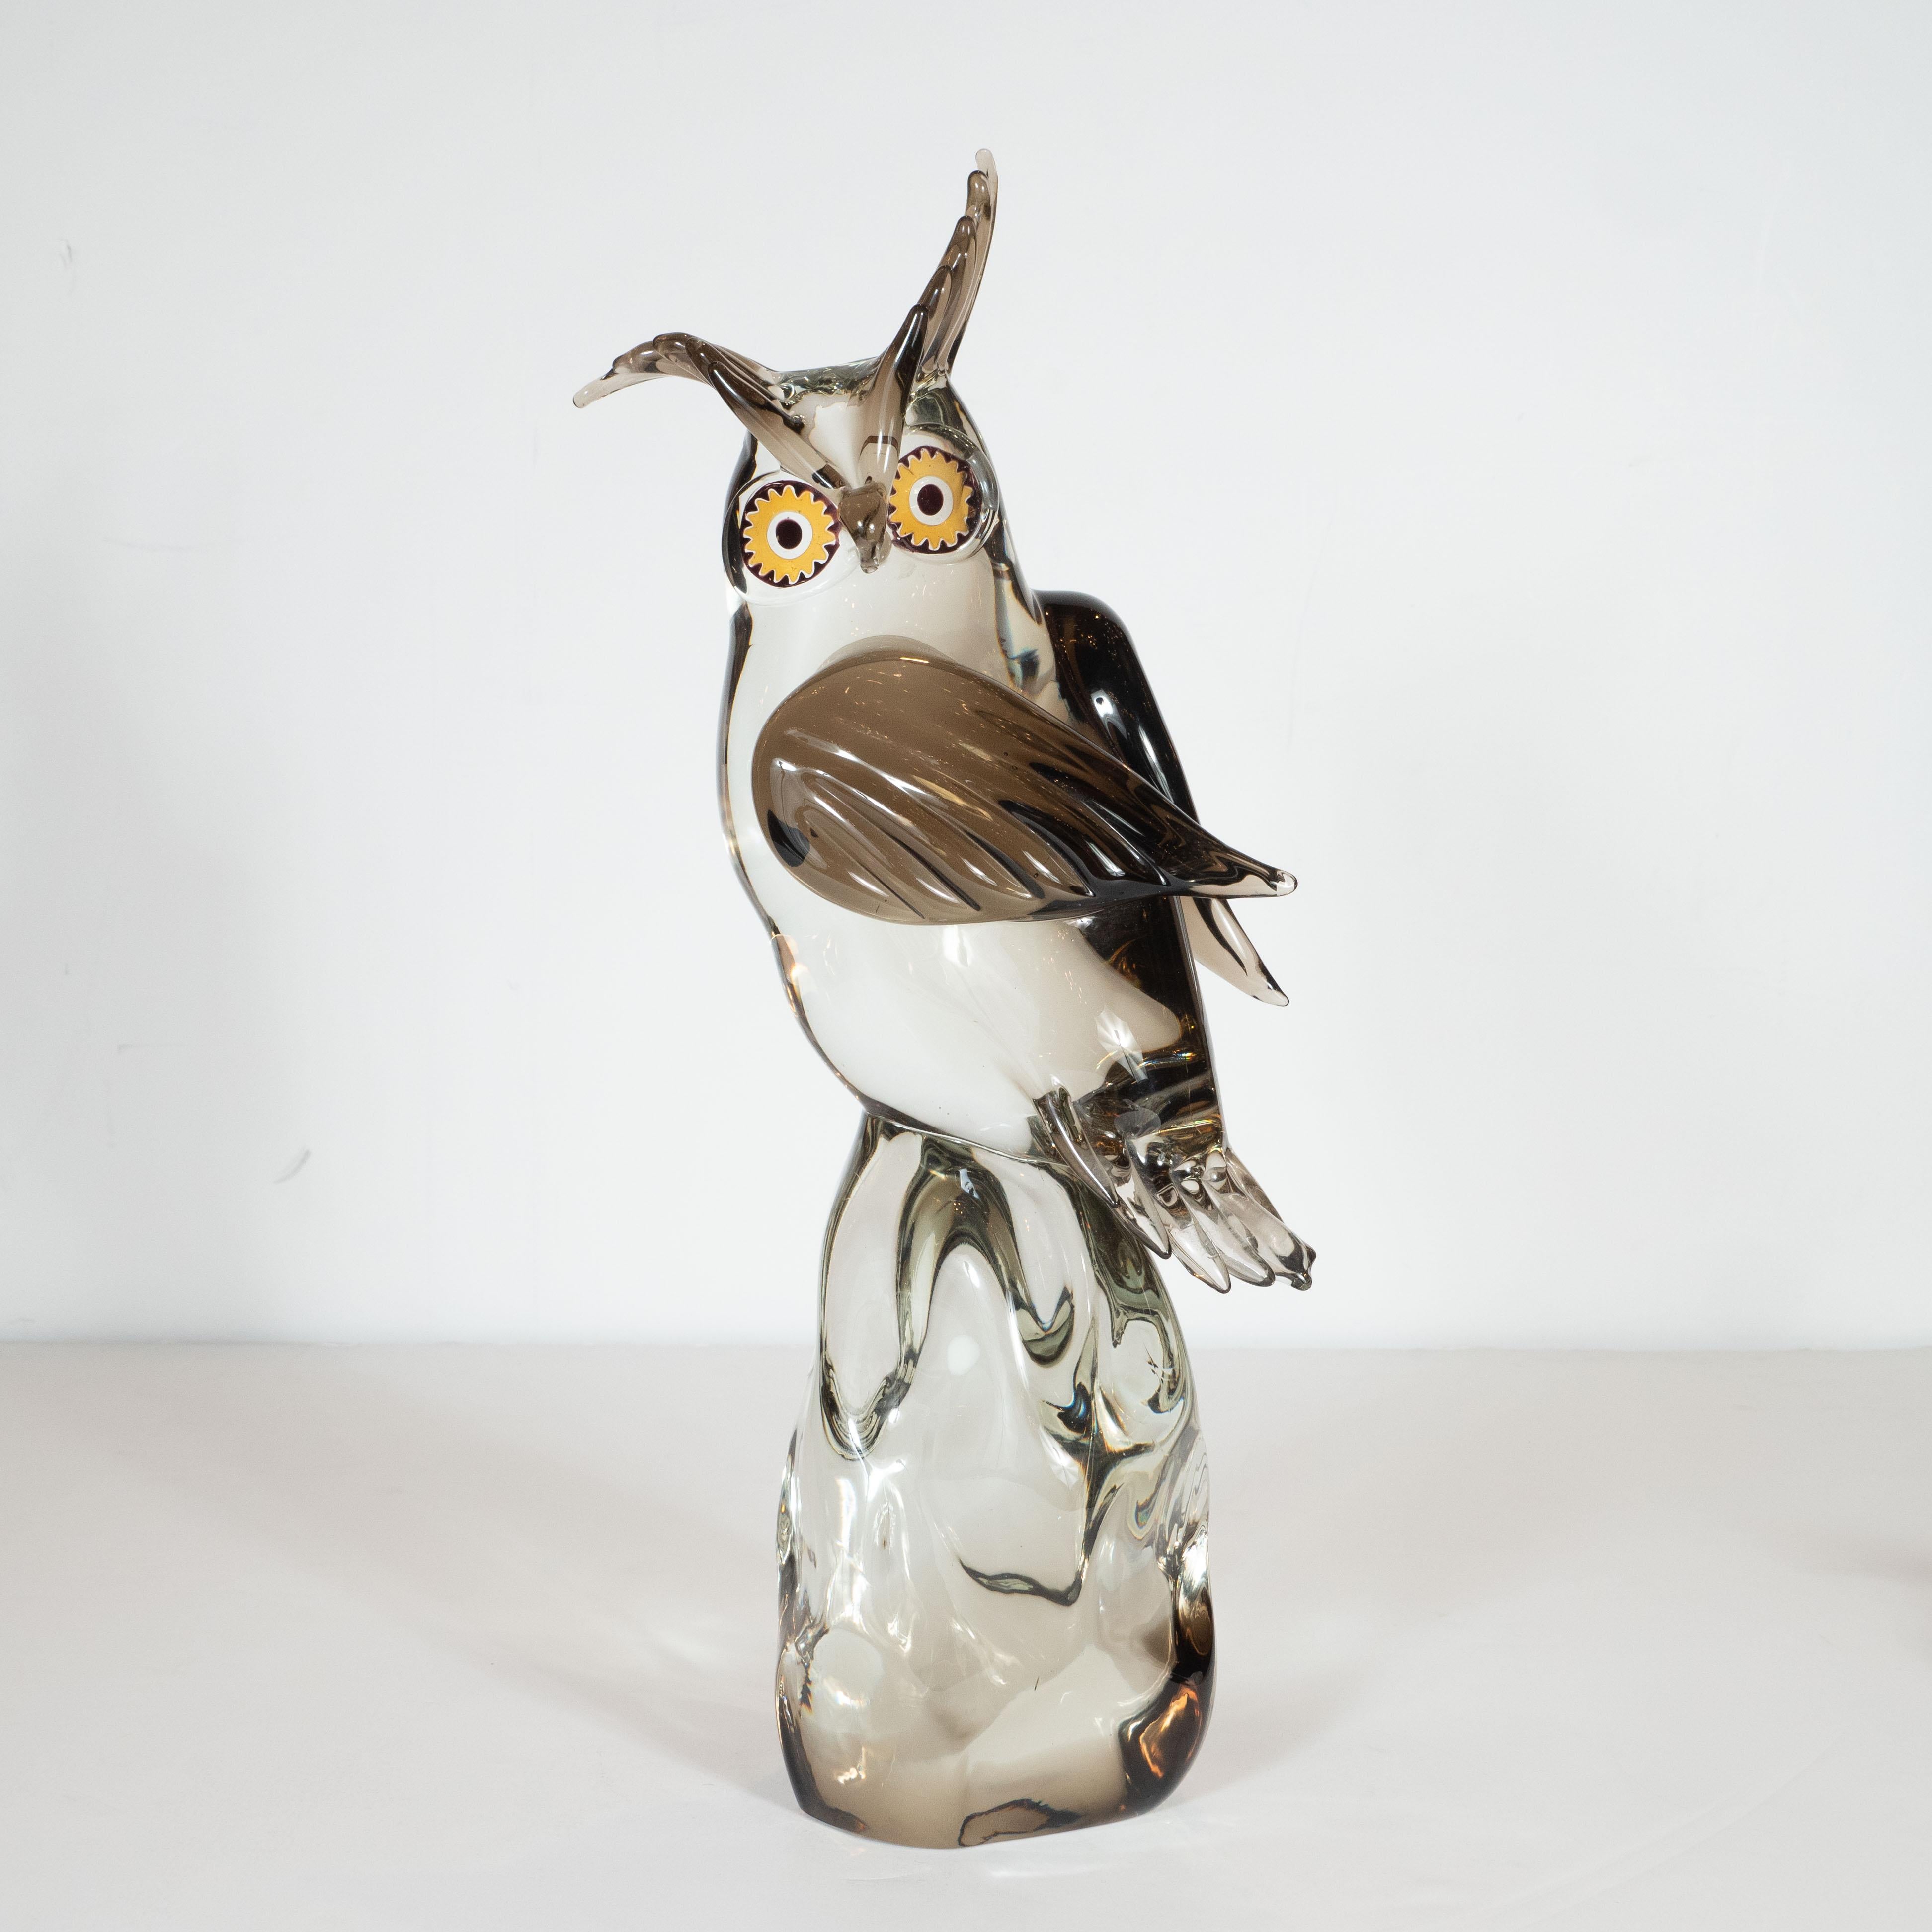 This sophisticated, yet whimsical, Mid-Century Modern owl sculpture was hand blown in Murano, Italy by the master glass maker himself- Licio Zanetti, circa 1960. The sculpture presents an owl perched on an organically contoured translucent base. The